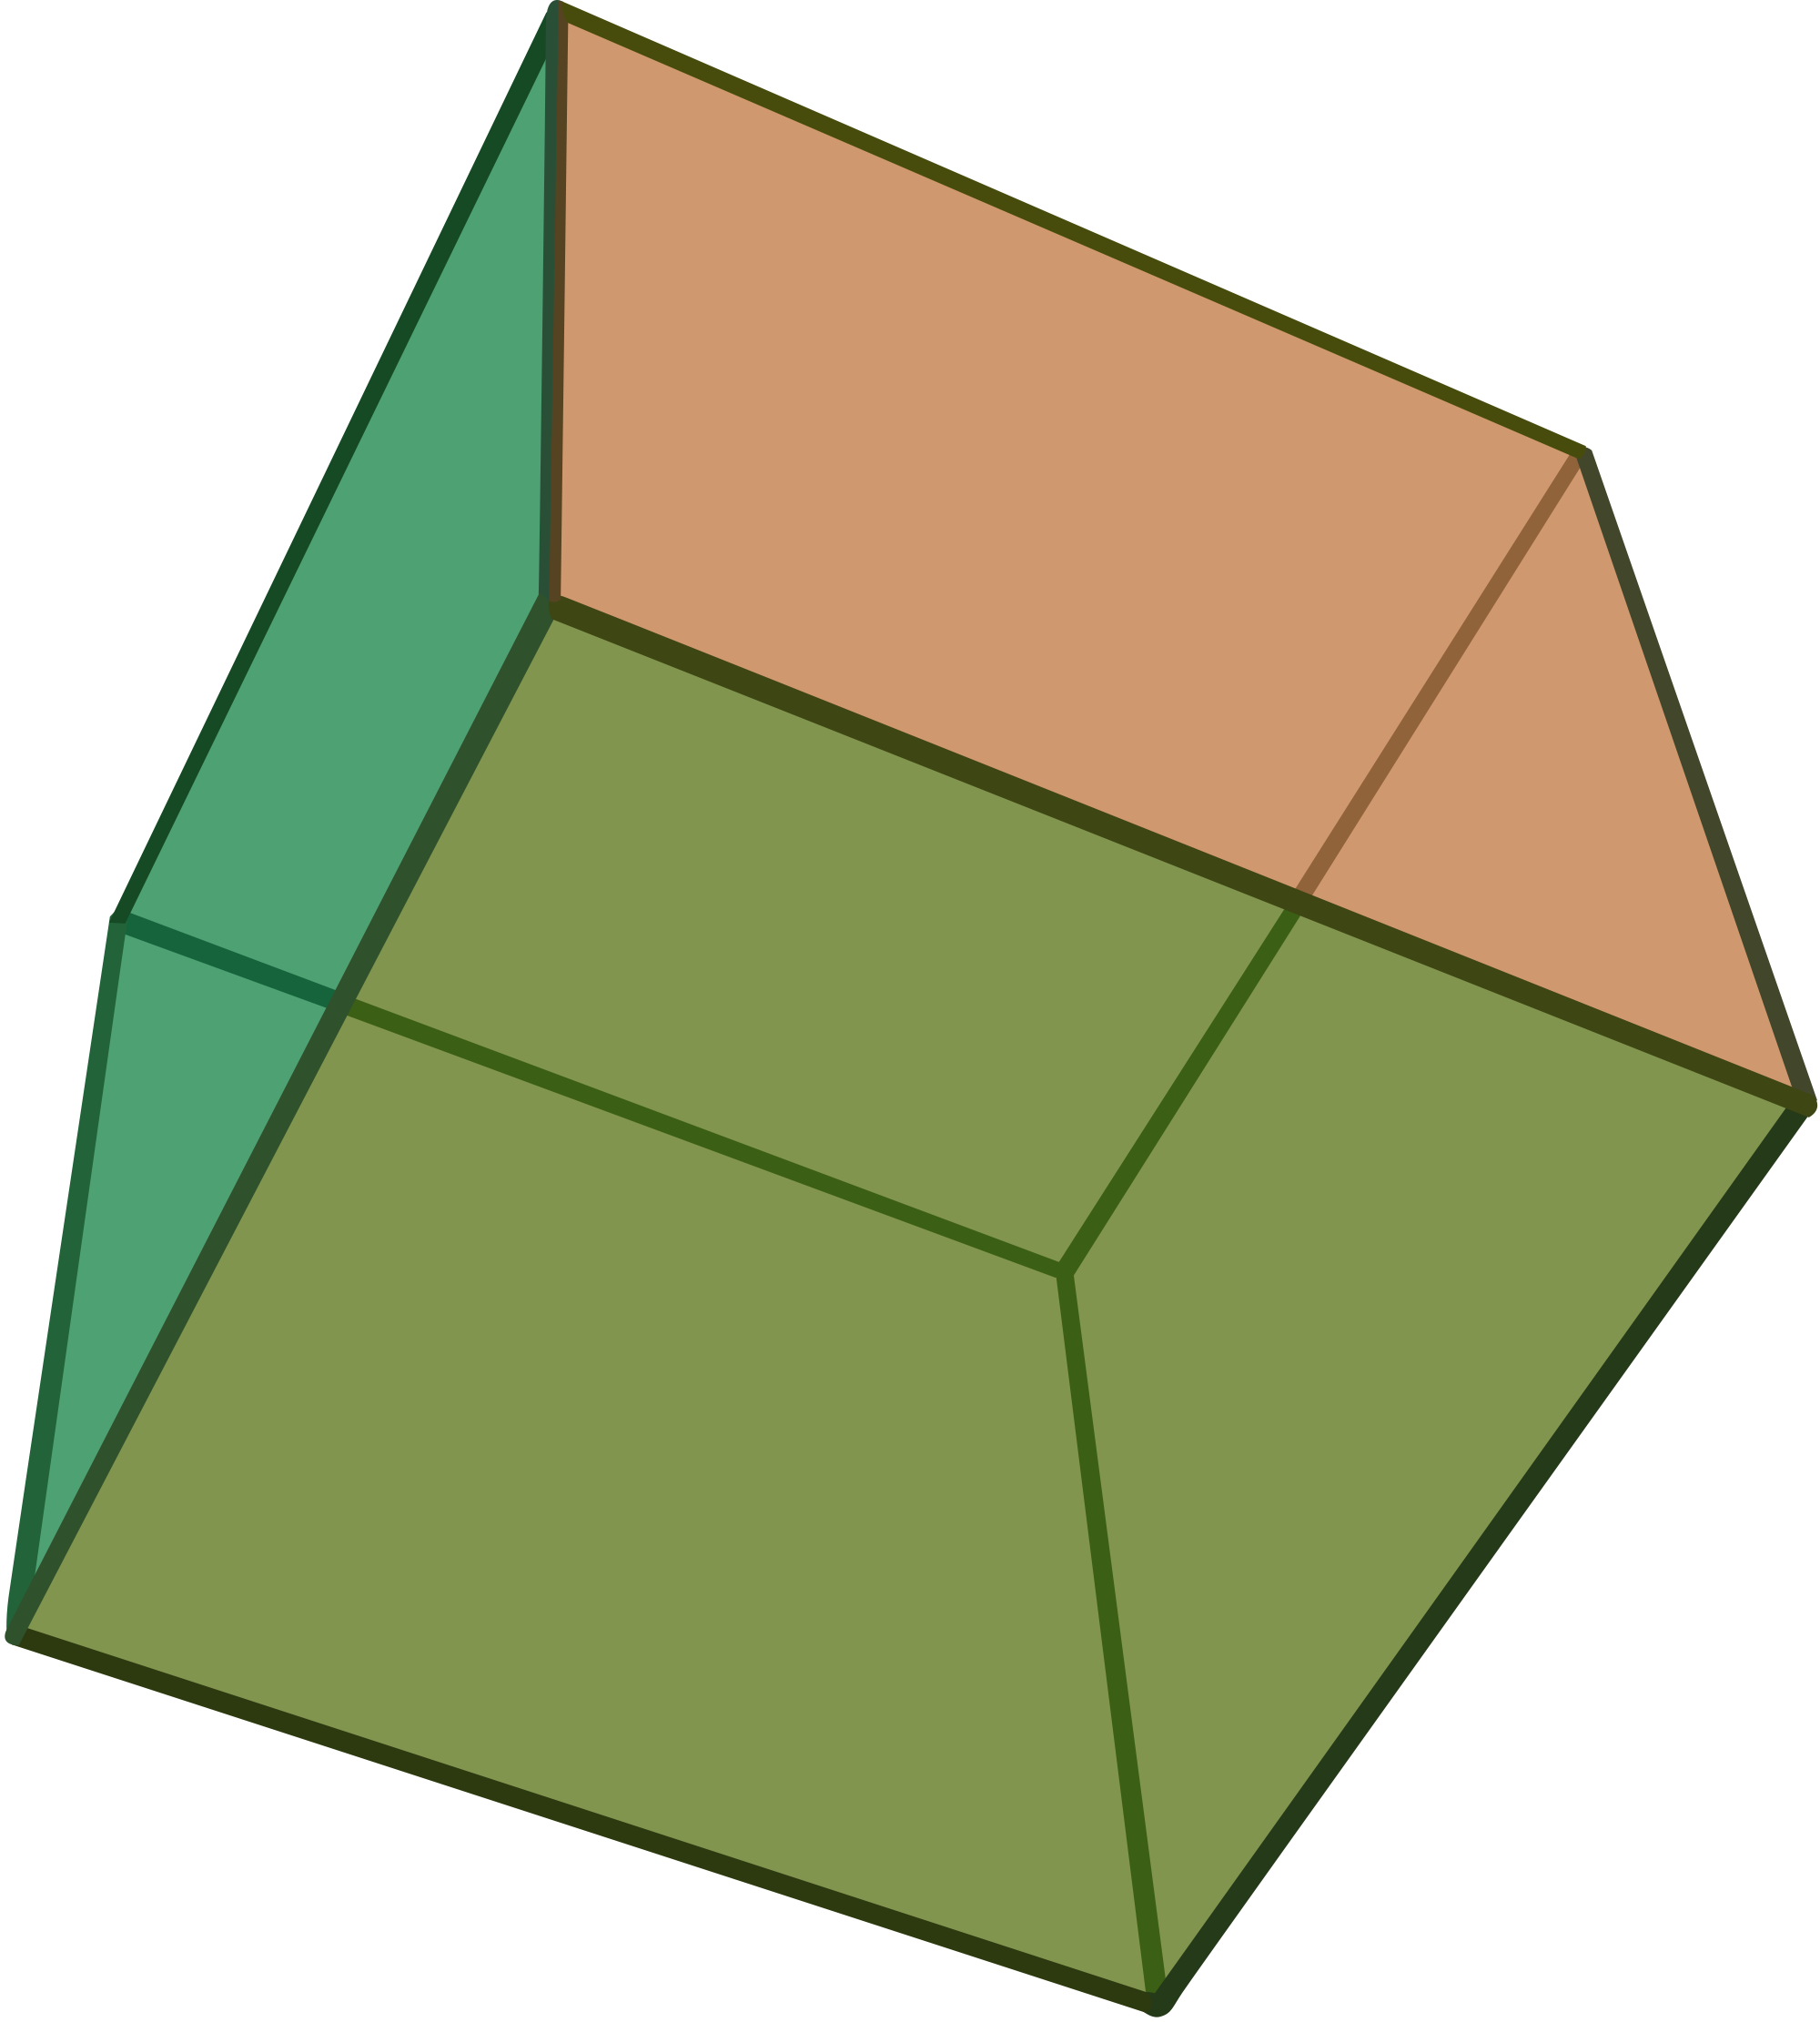 File hexahedron svg wikimedia. Cube clipart surface area